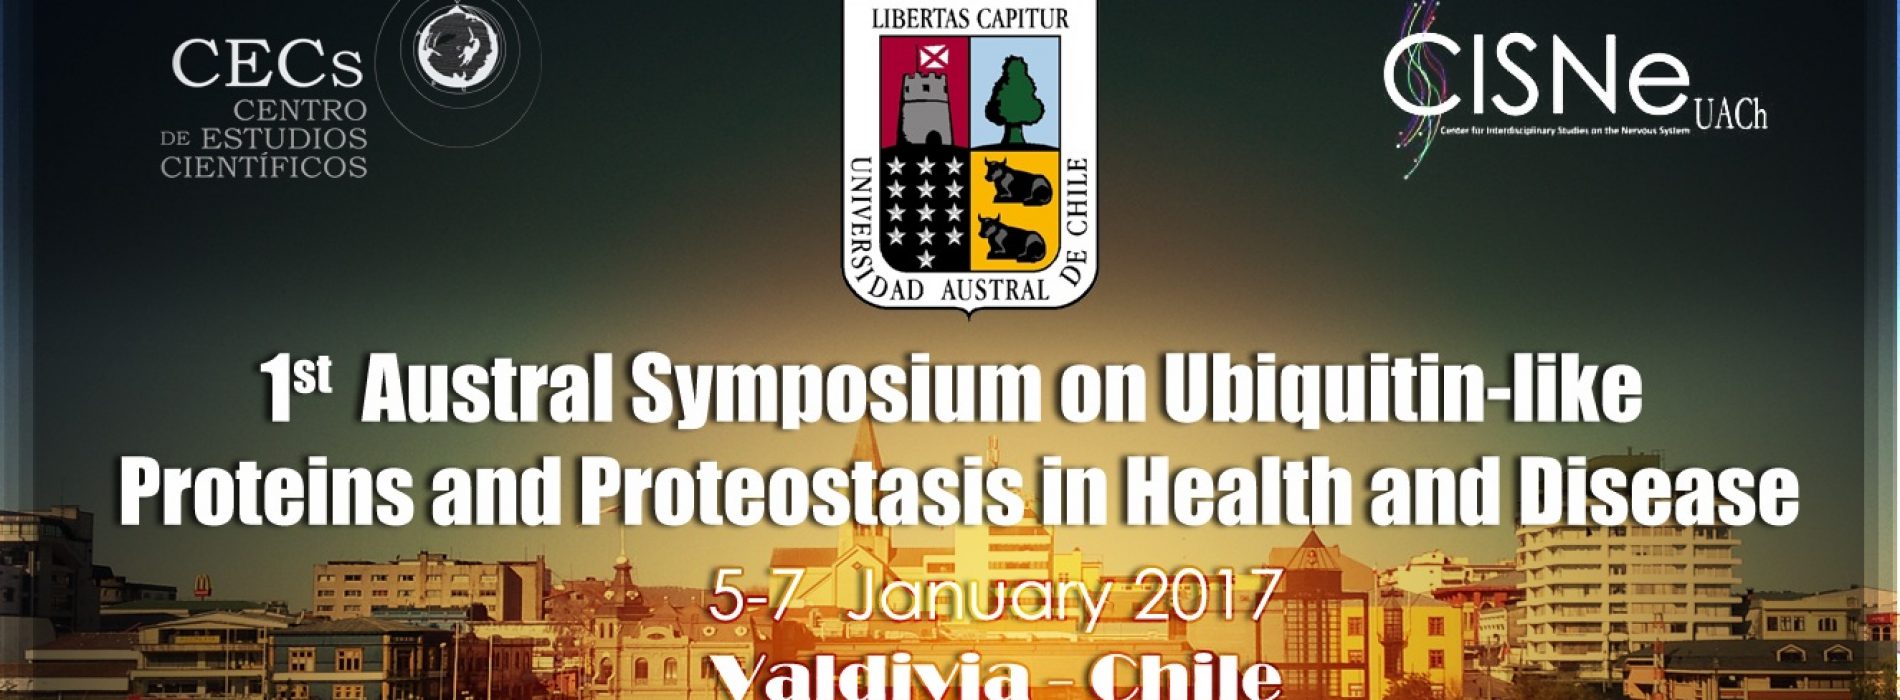 1ST Austral Symposium on Ubiquitin-like Proteins and Proteostasis in Health and Disease